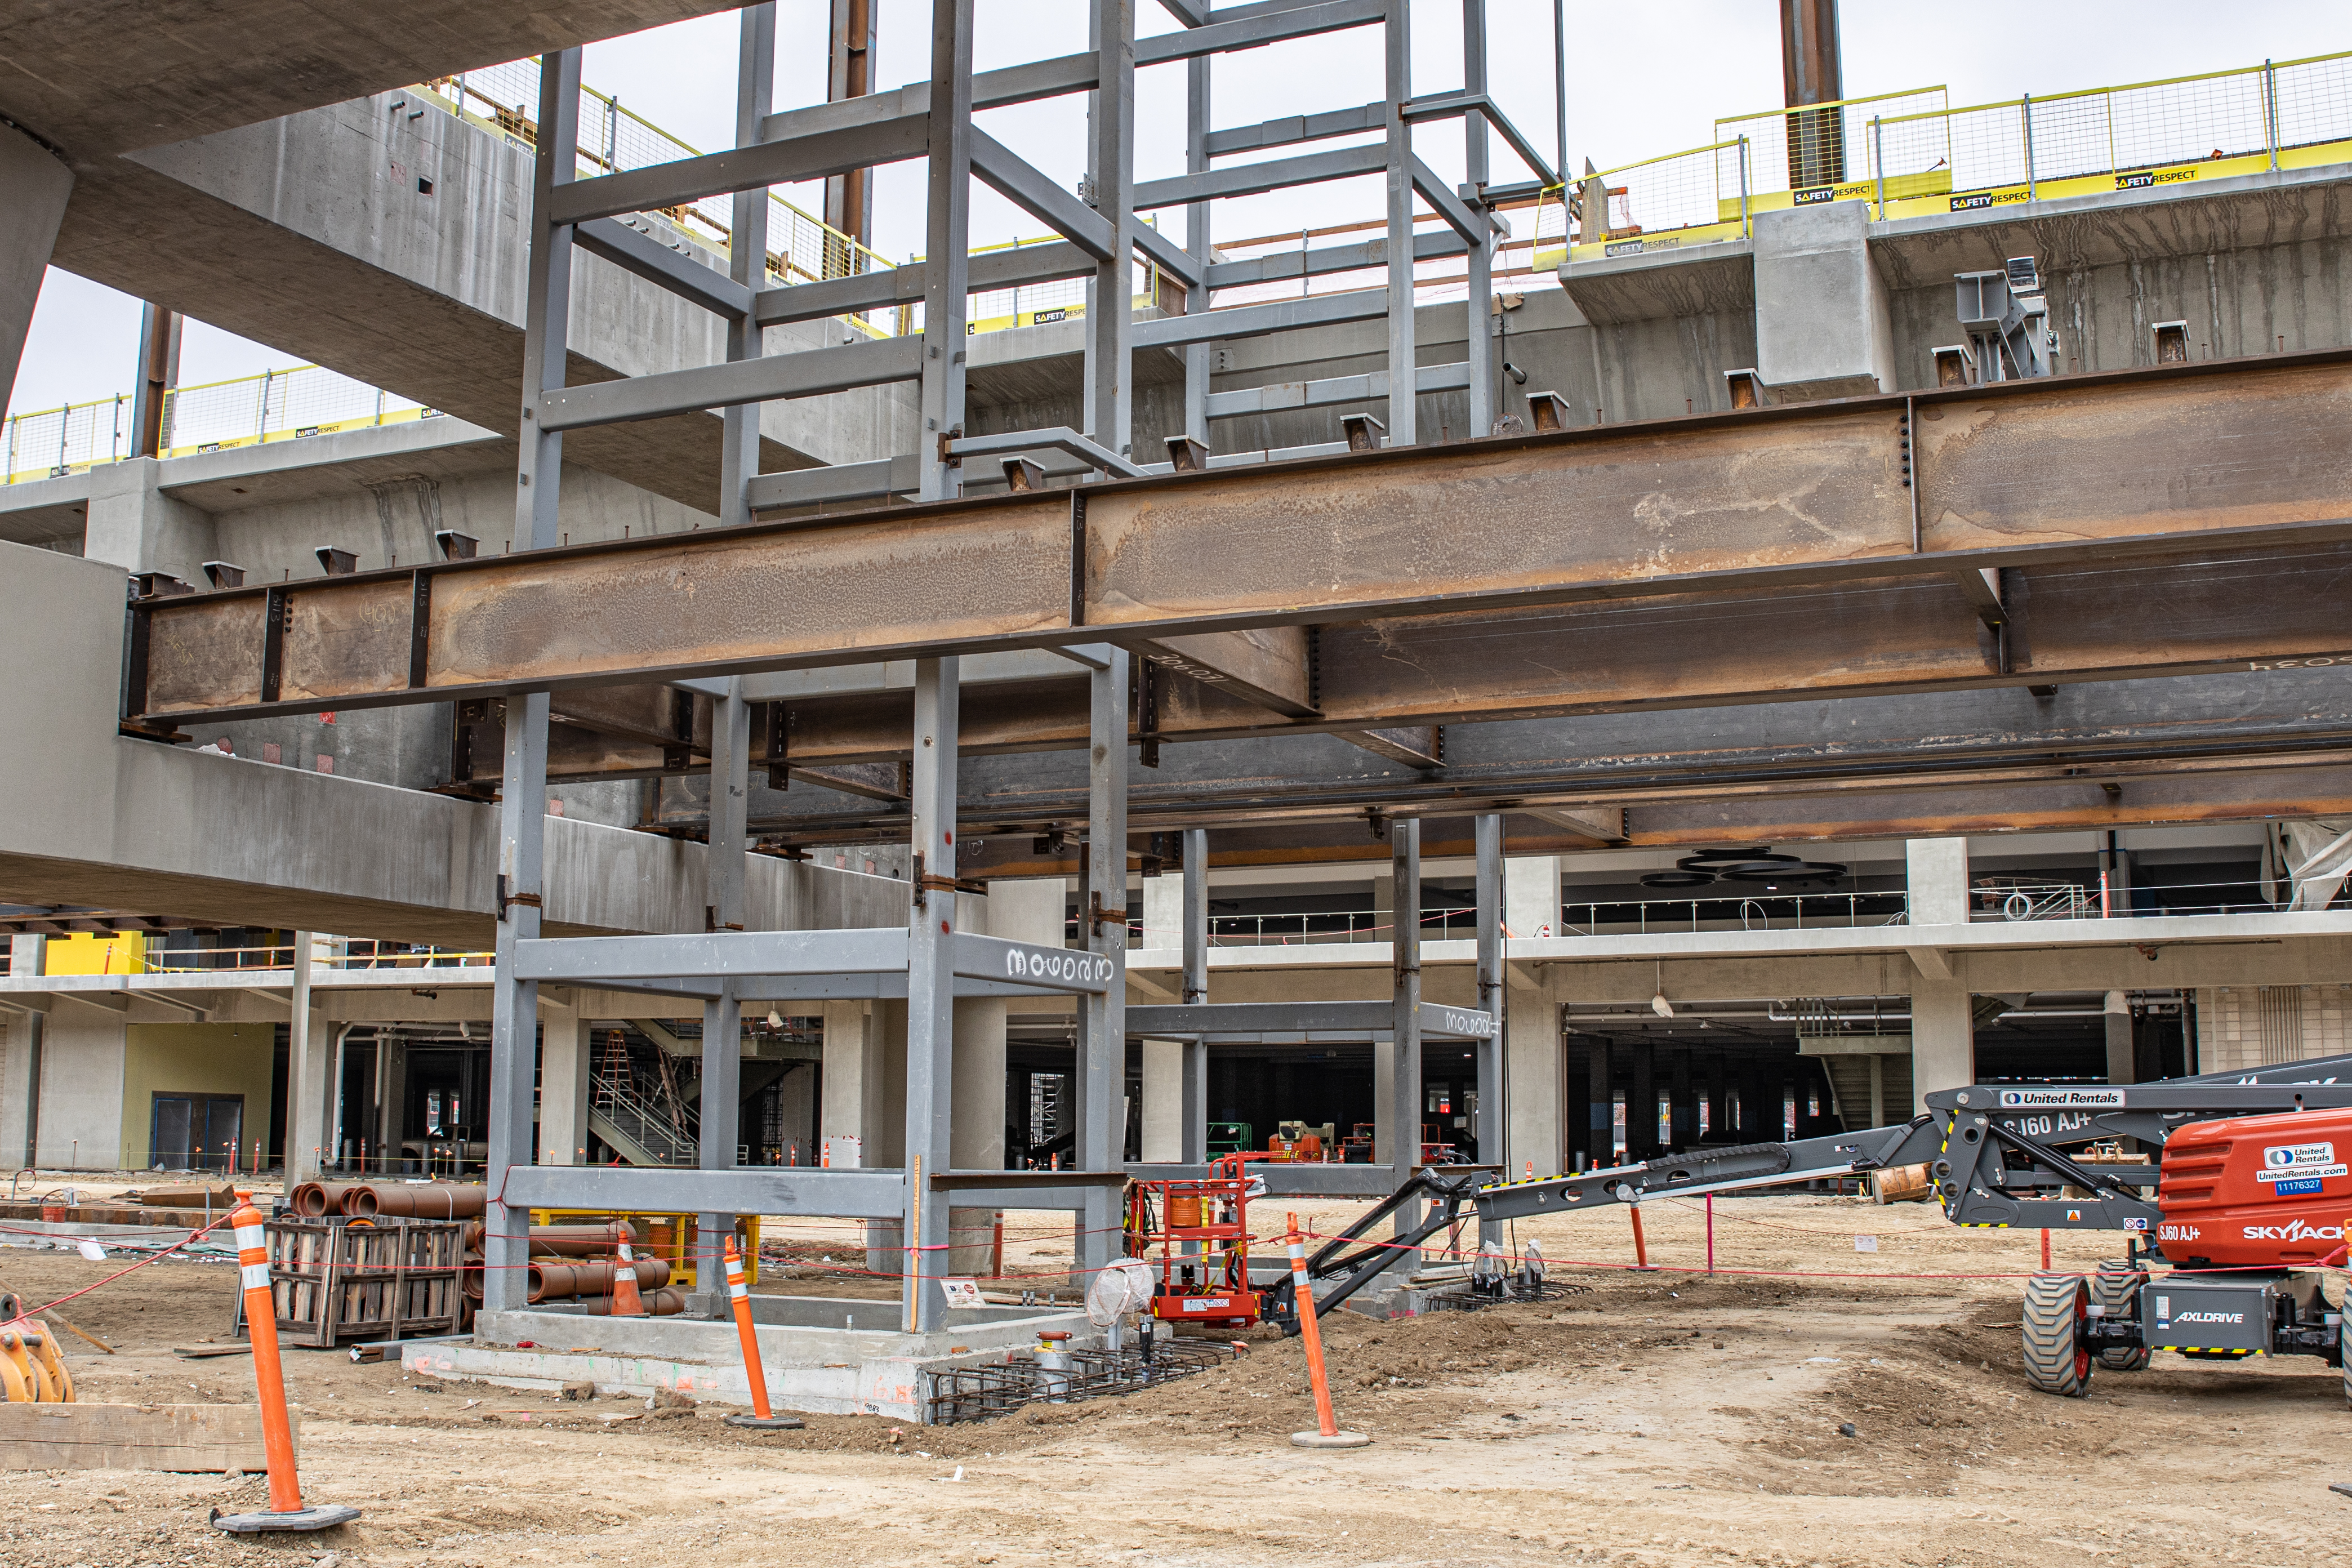 The future Intermodal Transportation Facility-West station is the station in the most advanced stages of construction.